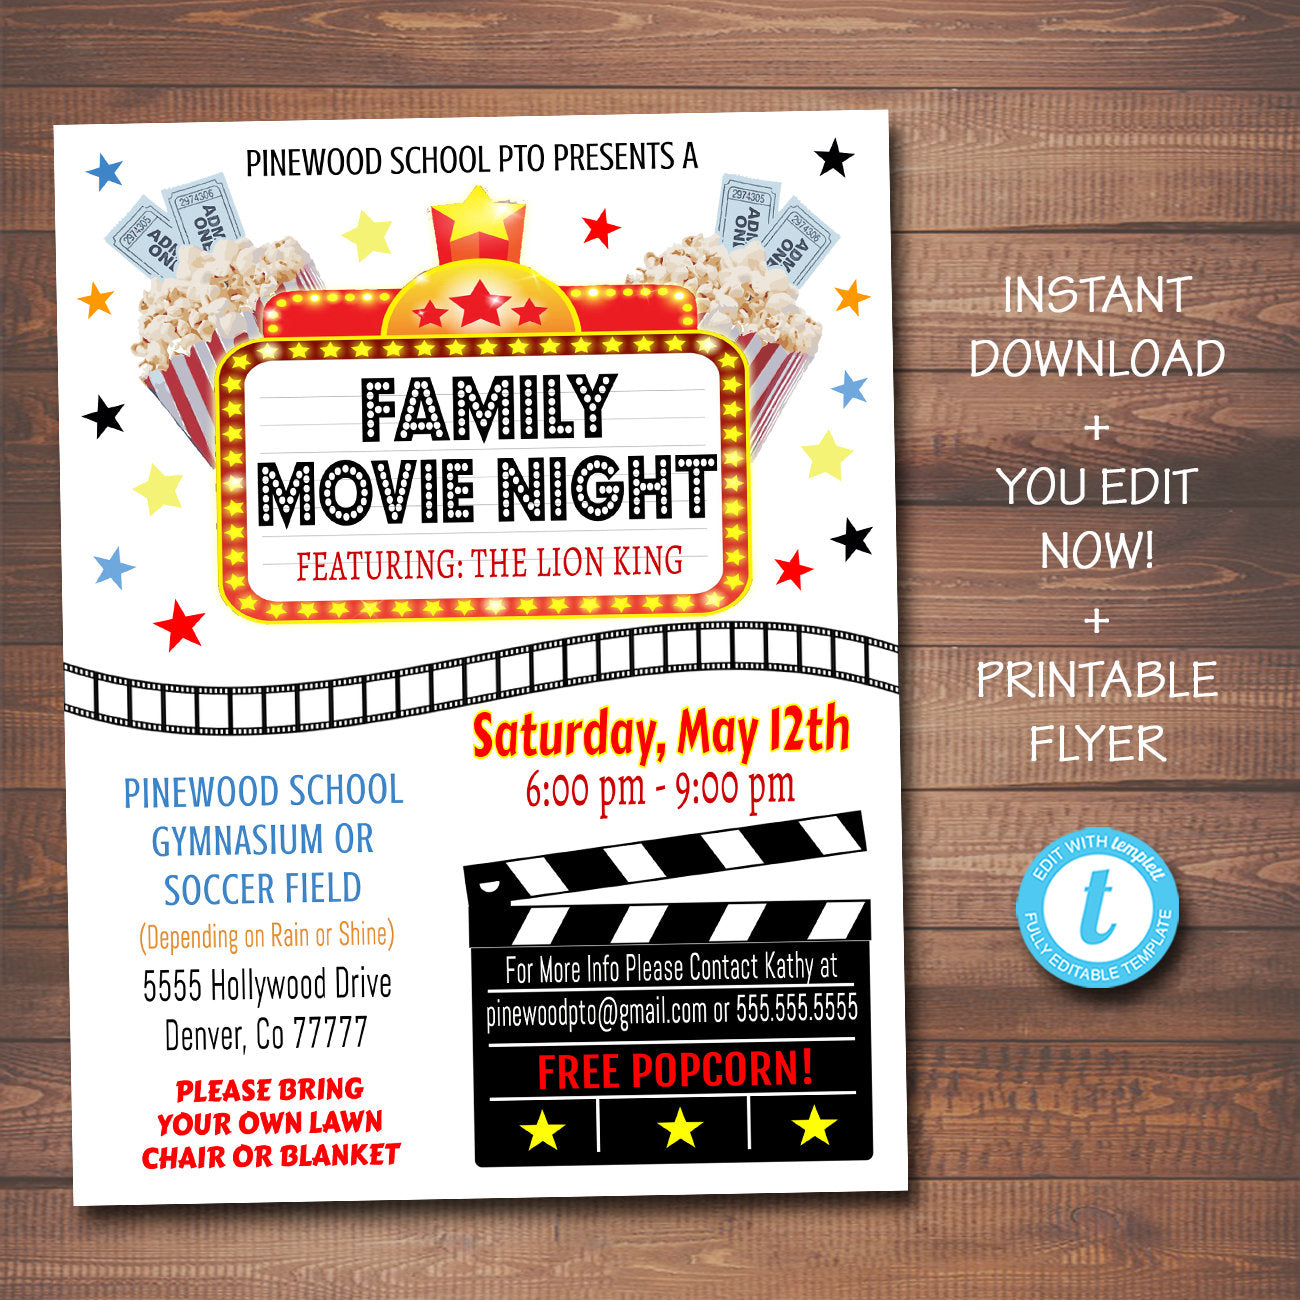 Family Movie Night Event Flyer - Printable Template  TidyLady With Regard To Family Night Flyer Template